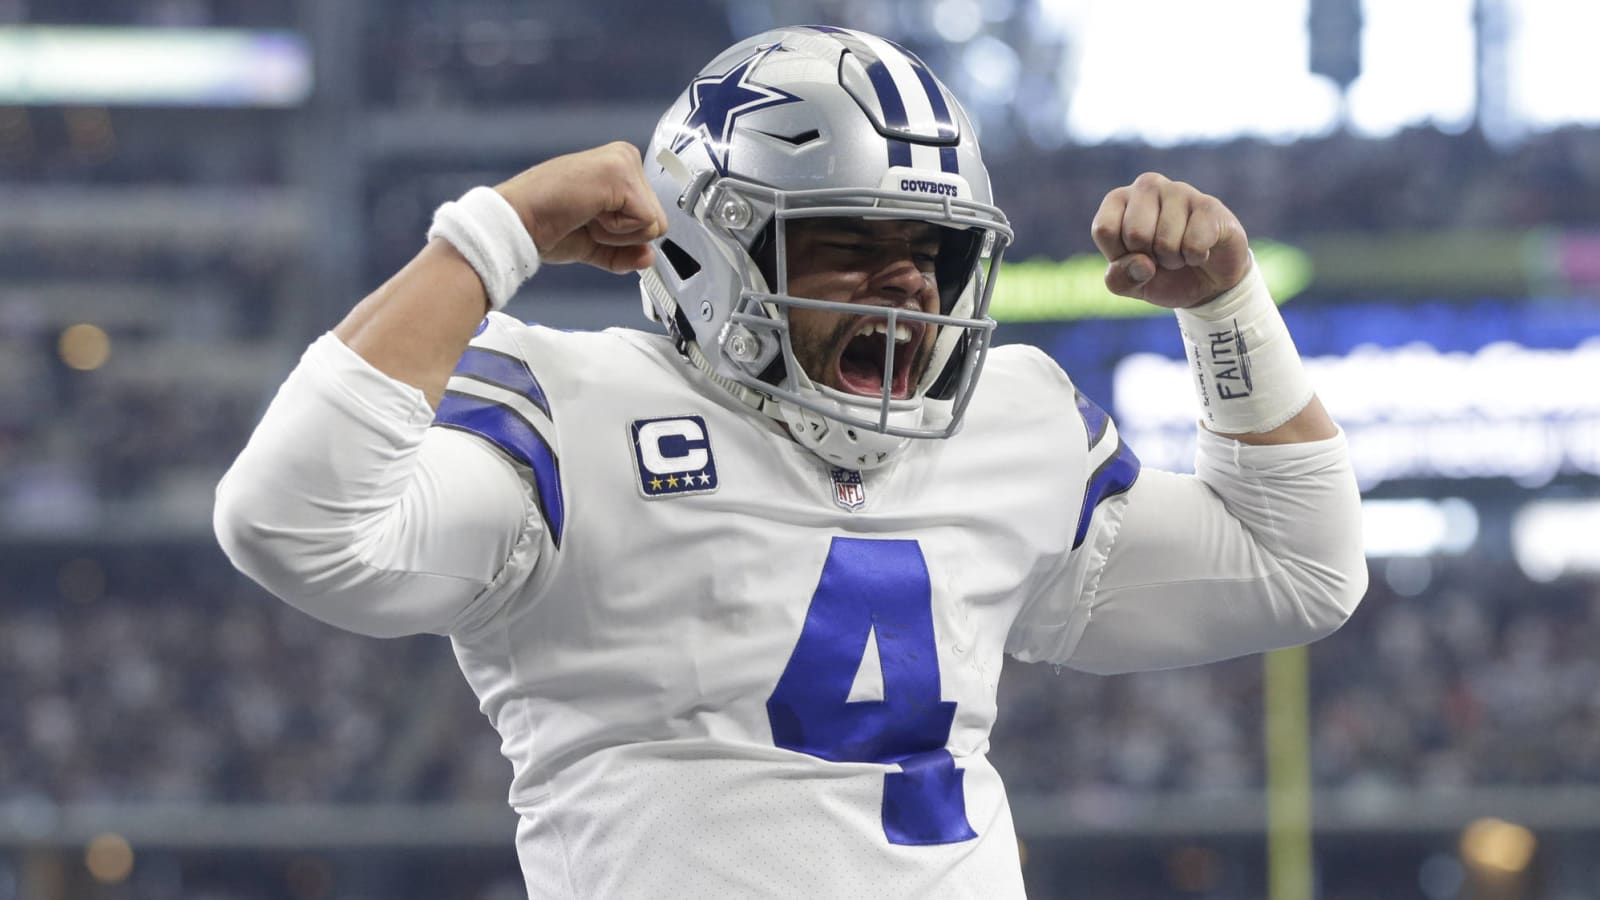 Why QB Dak Prescott should stick to his guns in contract dispute with Cowboys